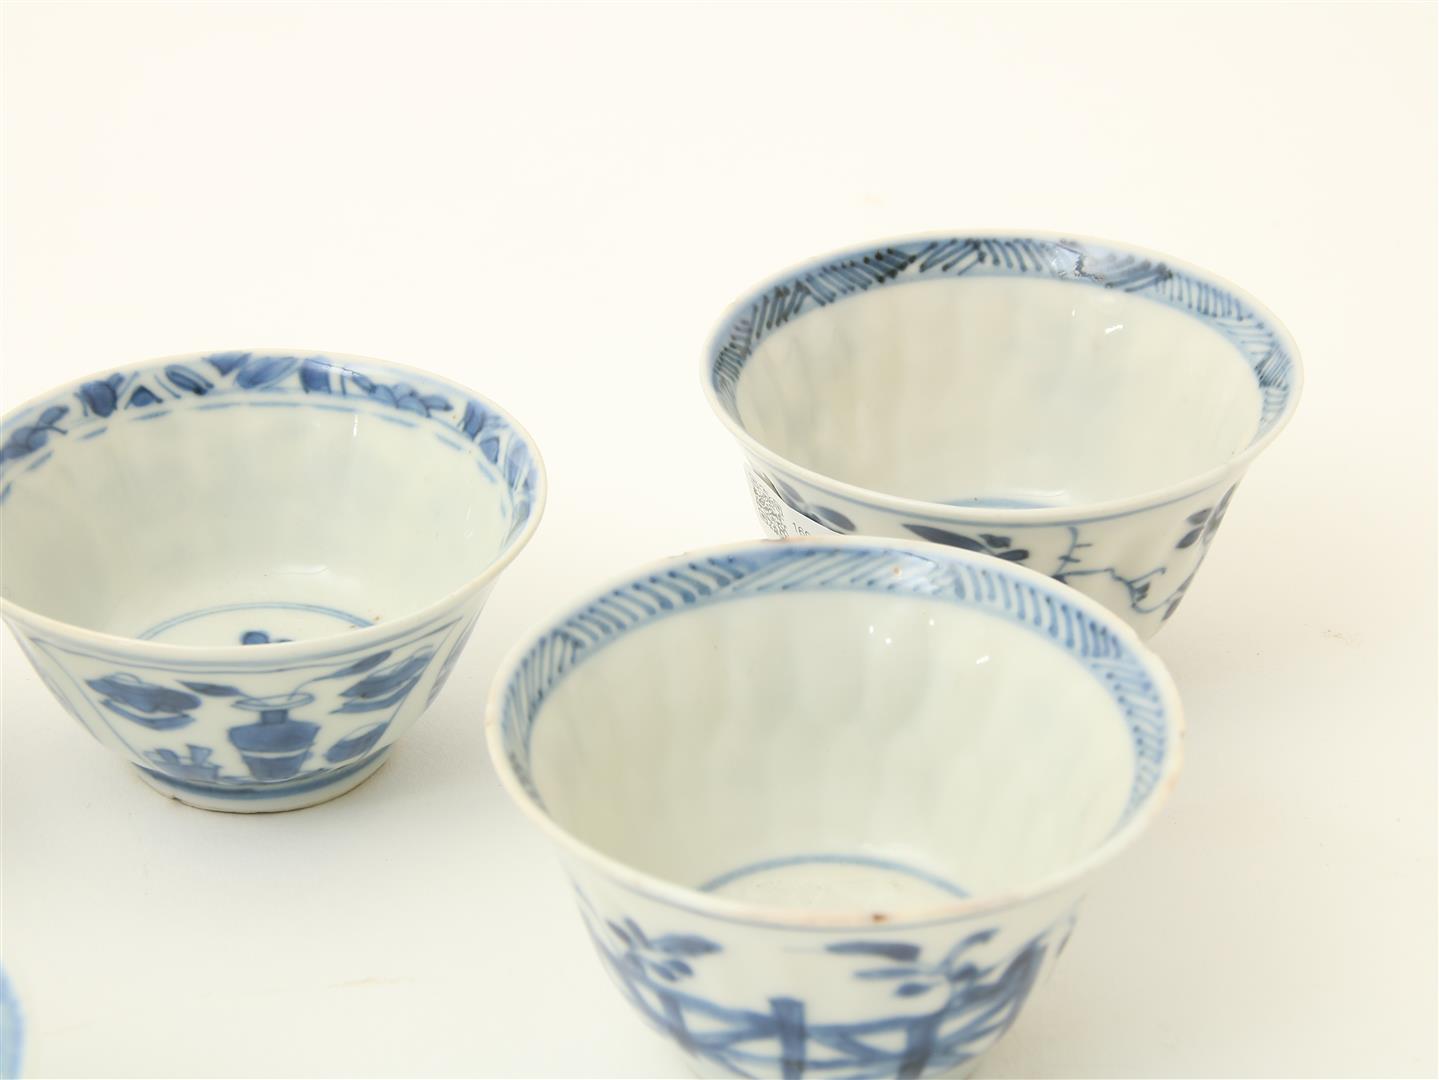 Series of 3 porcelain Kangxi cups with flower decoration and marked with Lozenge mark, including 5 - Image 4 of 6